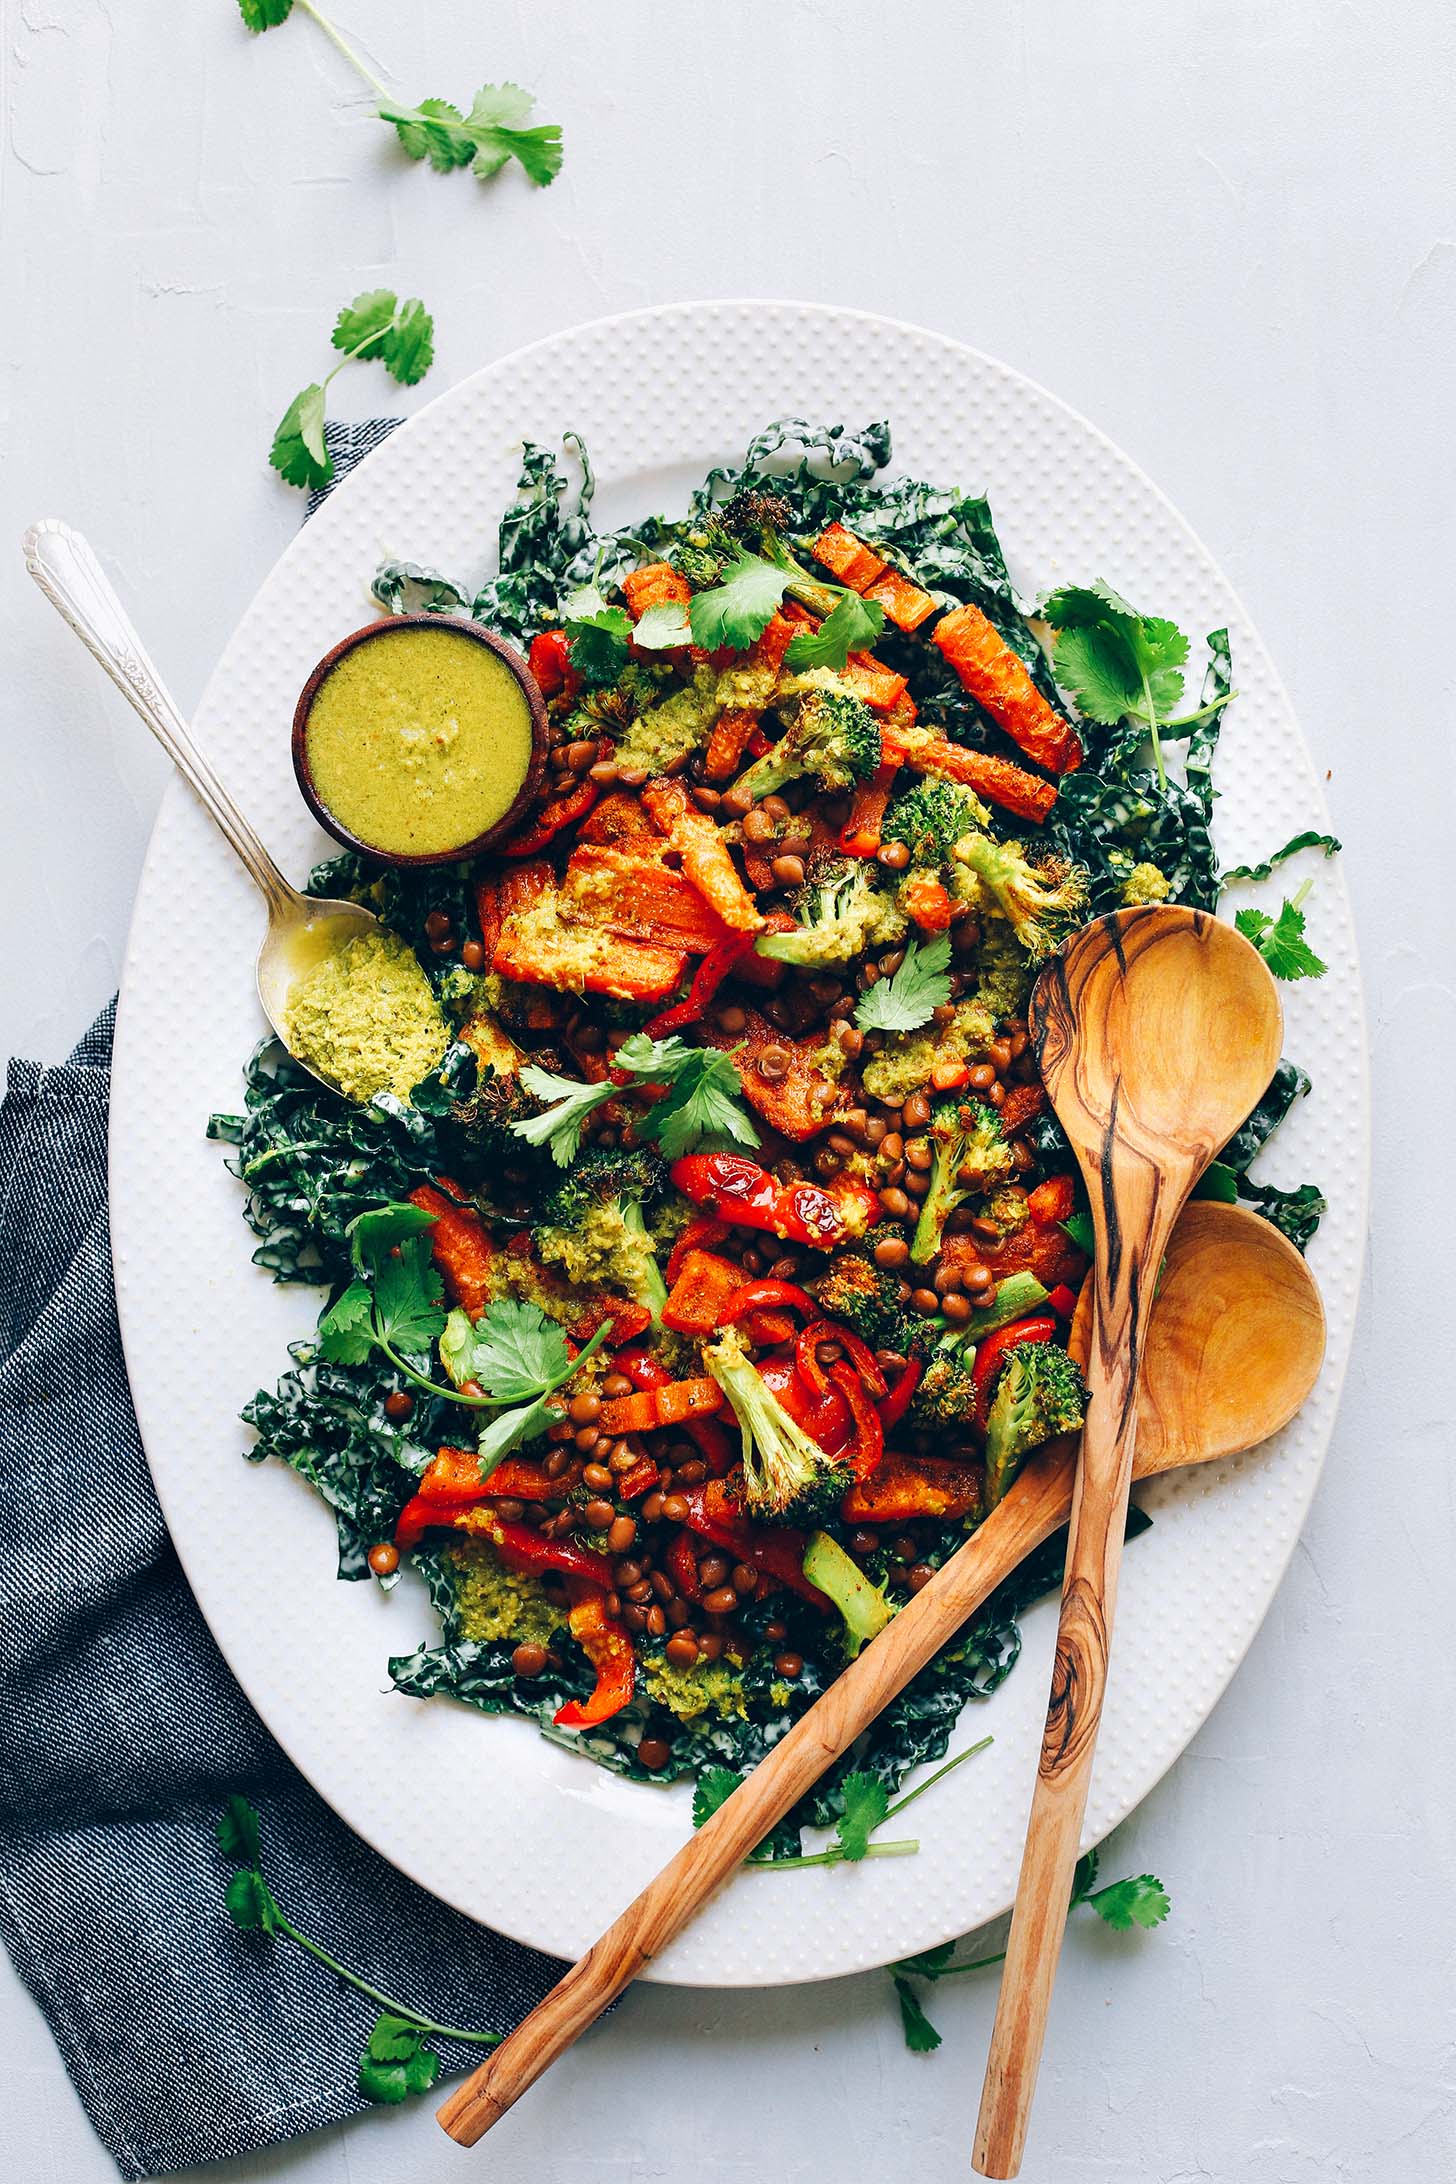 Platter of colorful plant-based Curried Lentil Salad with Kale, Roasted Veggies, and Green Curry Dressing